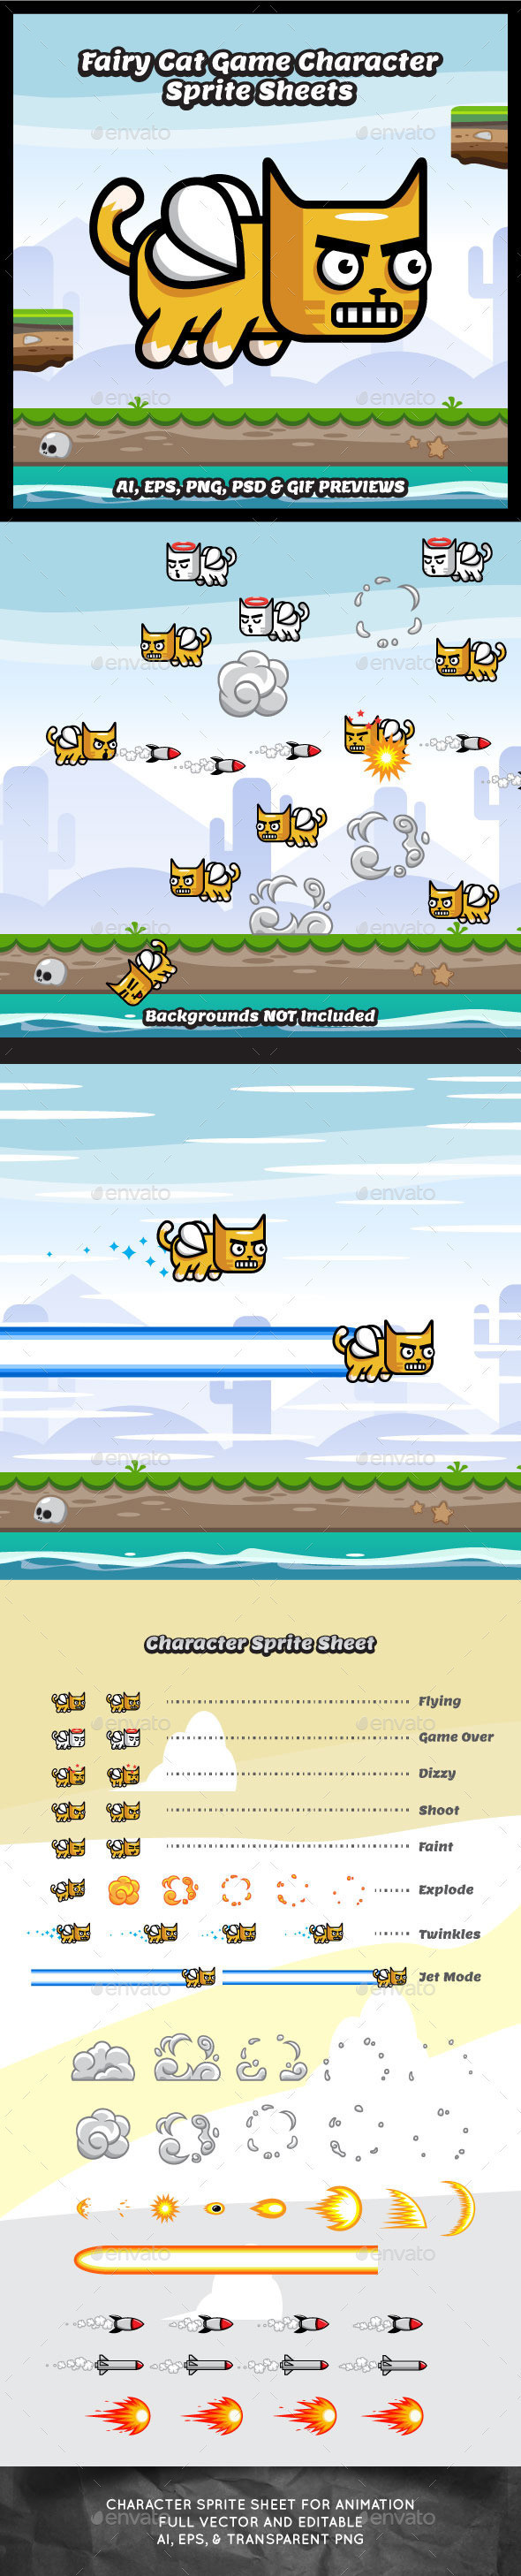 Flappy fairy cat game character sprite sheet sidescroller game asset flying flappy animation gui mobile games gameart game art 590